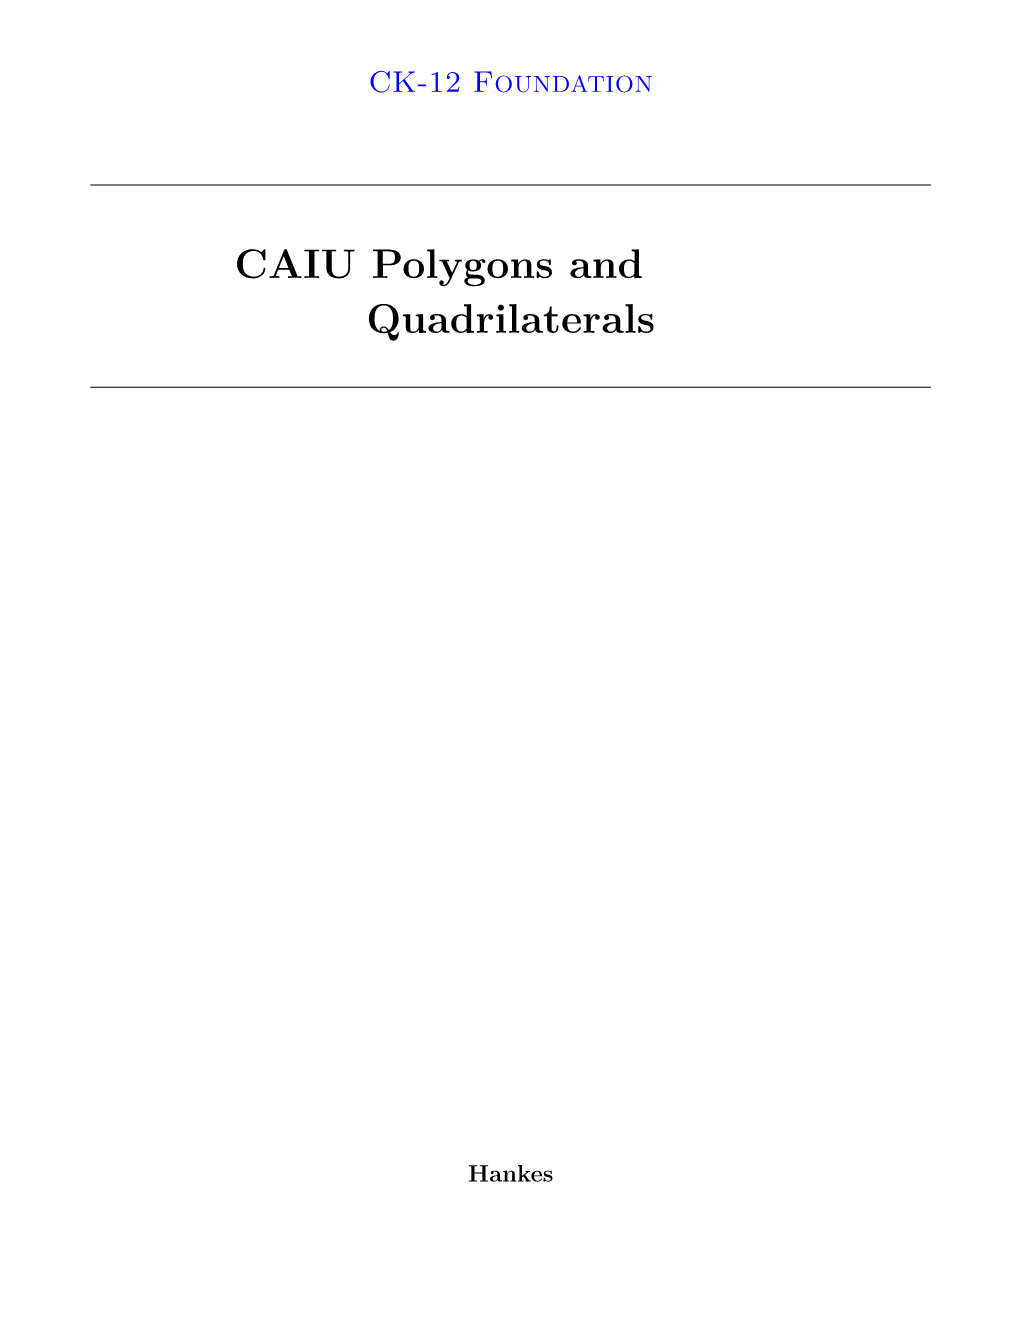 CAIU Polygons and Quadrilaterals